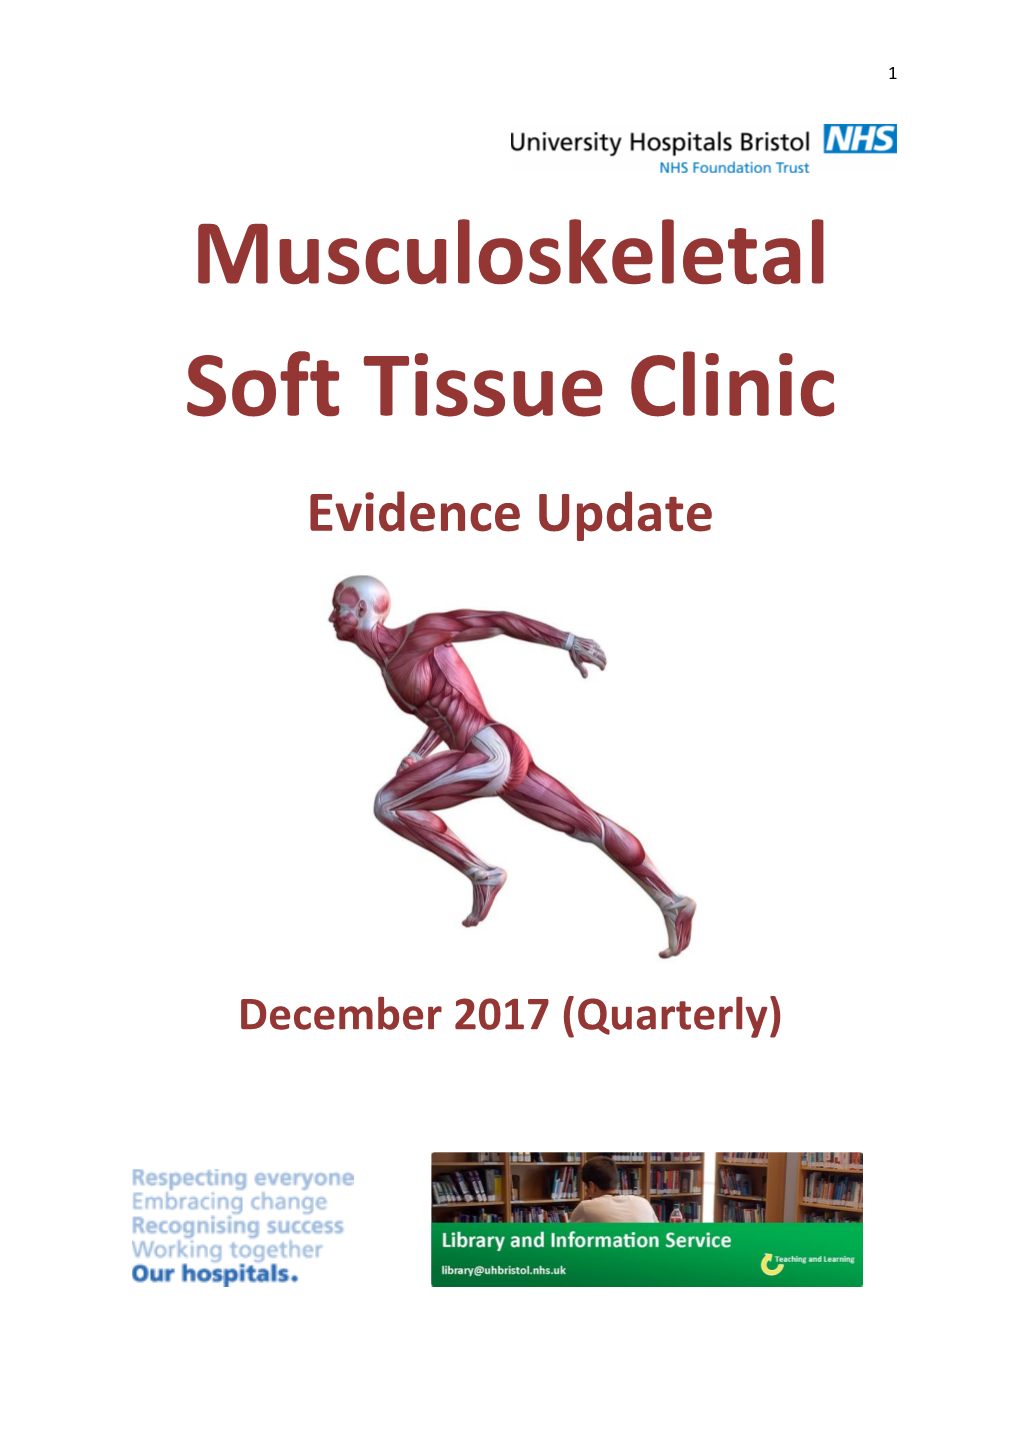 Musculoskeletal Soft Tissue Clinic Evidence Update